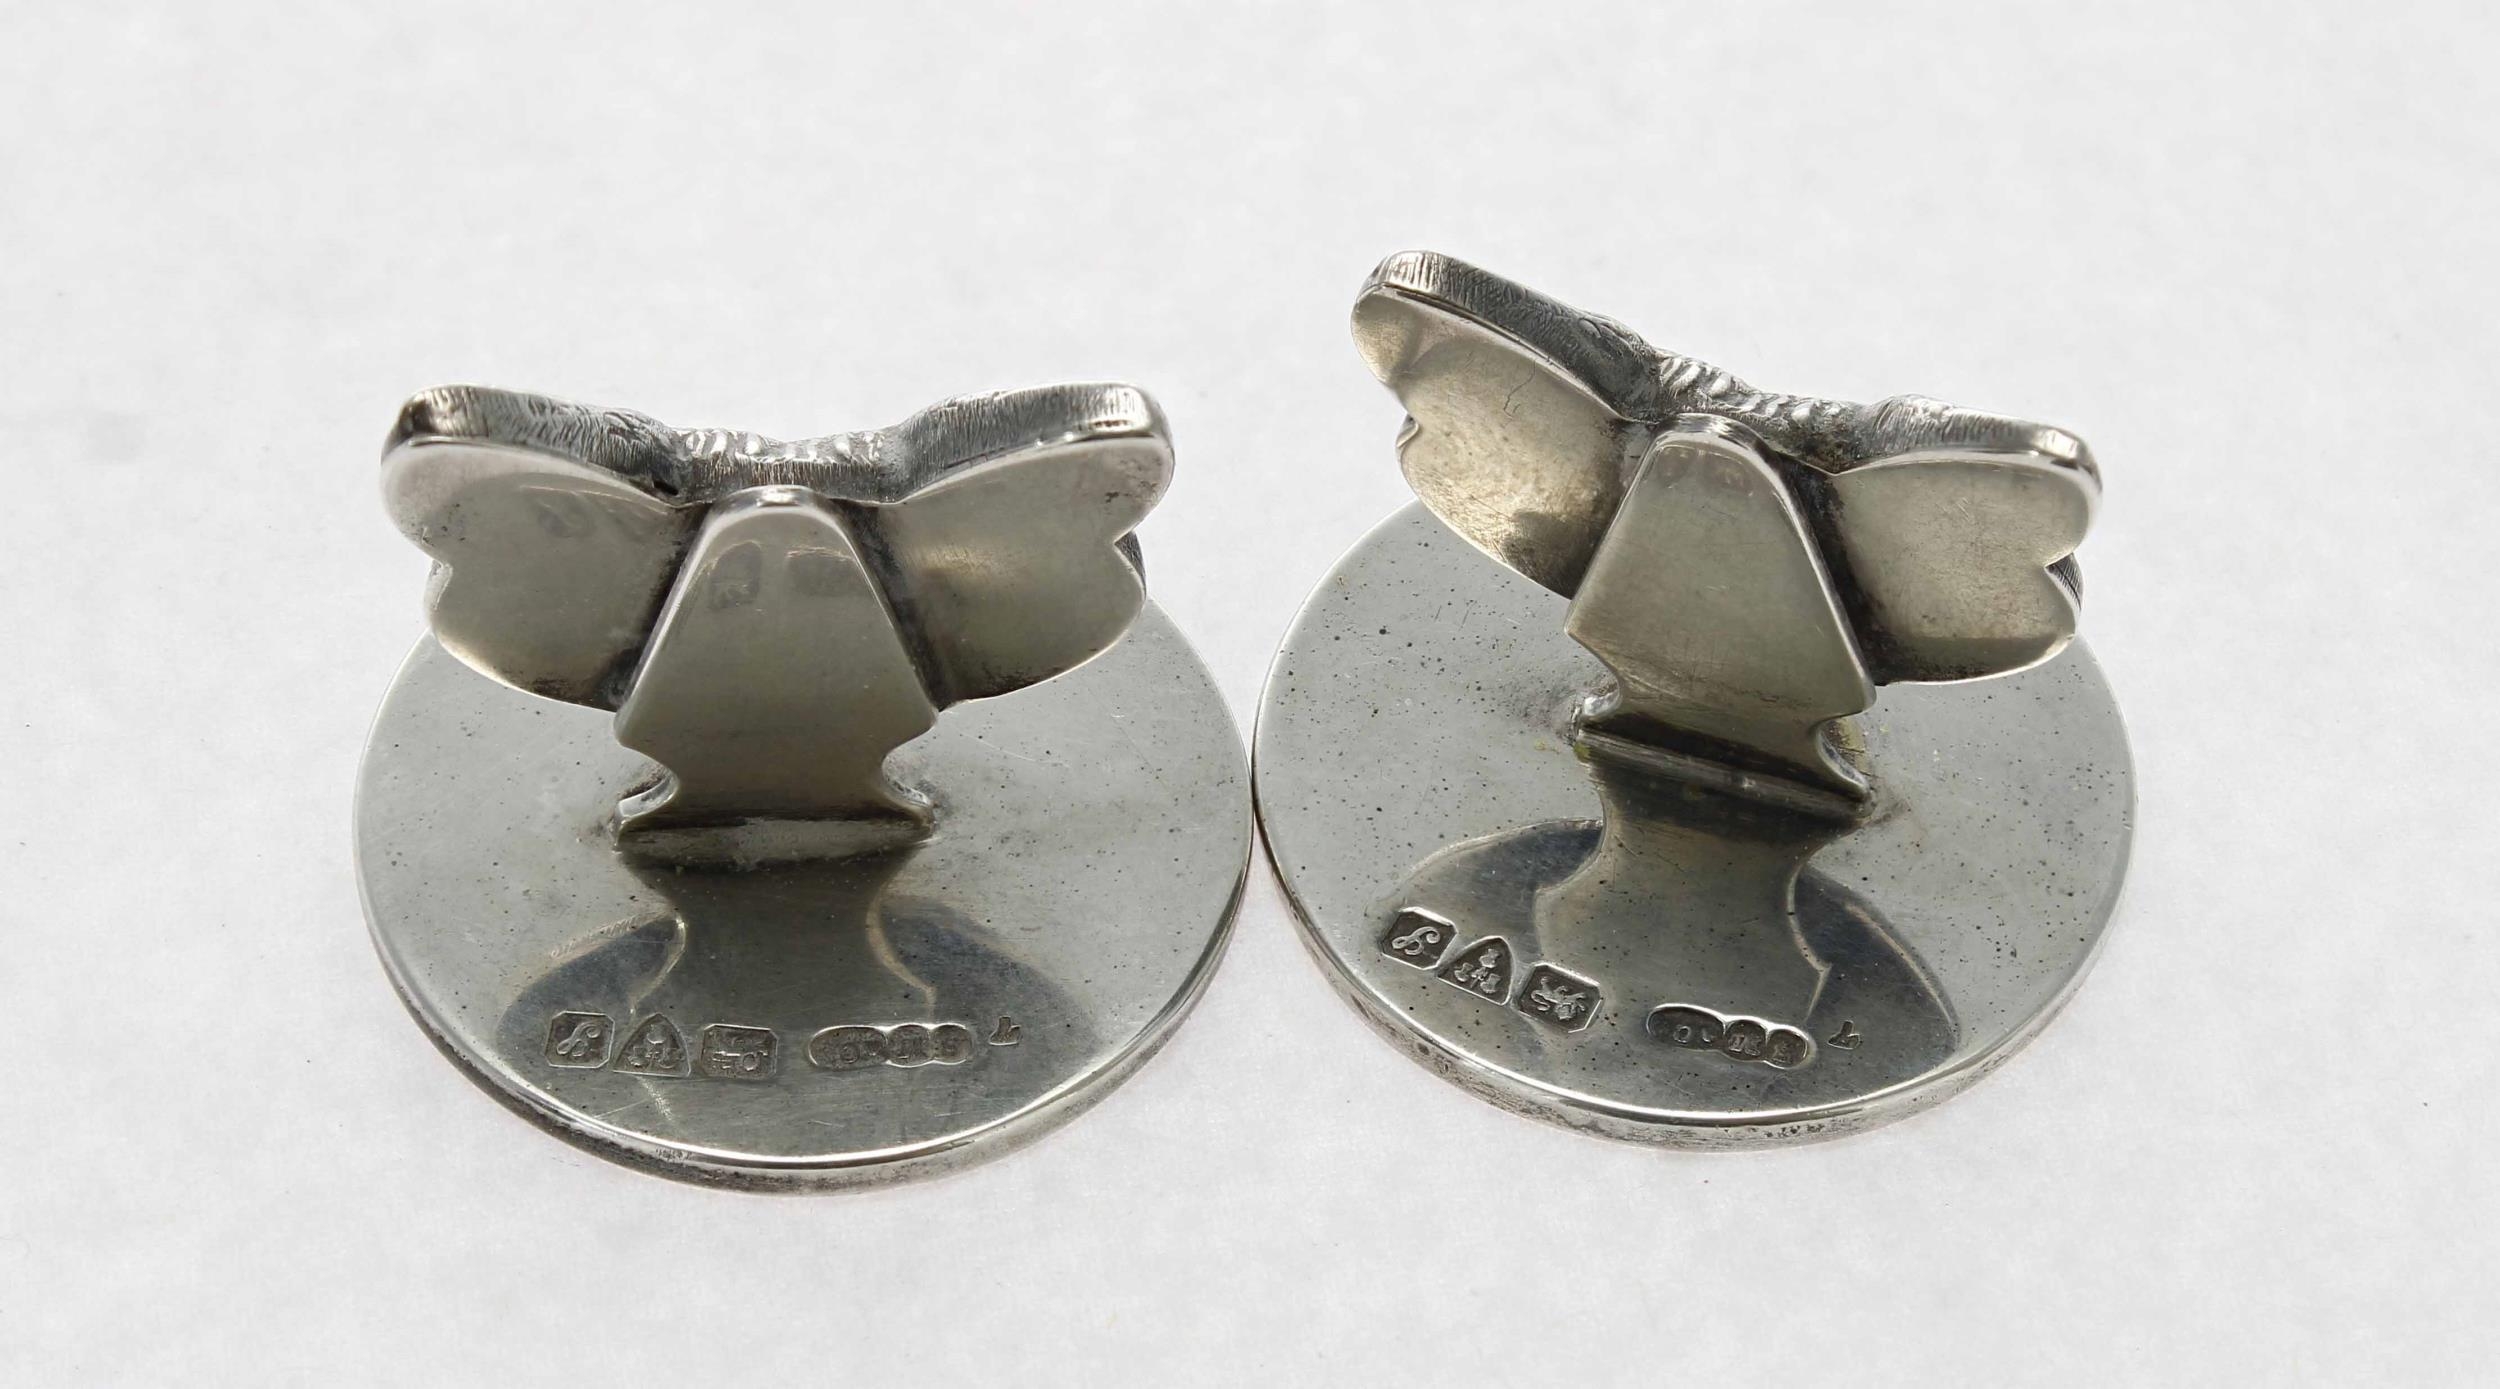 Pair of novelty silver fox menu holders by Sampson Morden & Co., with glass eyes, hallmarked Chester - Image 2 of 2